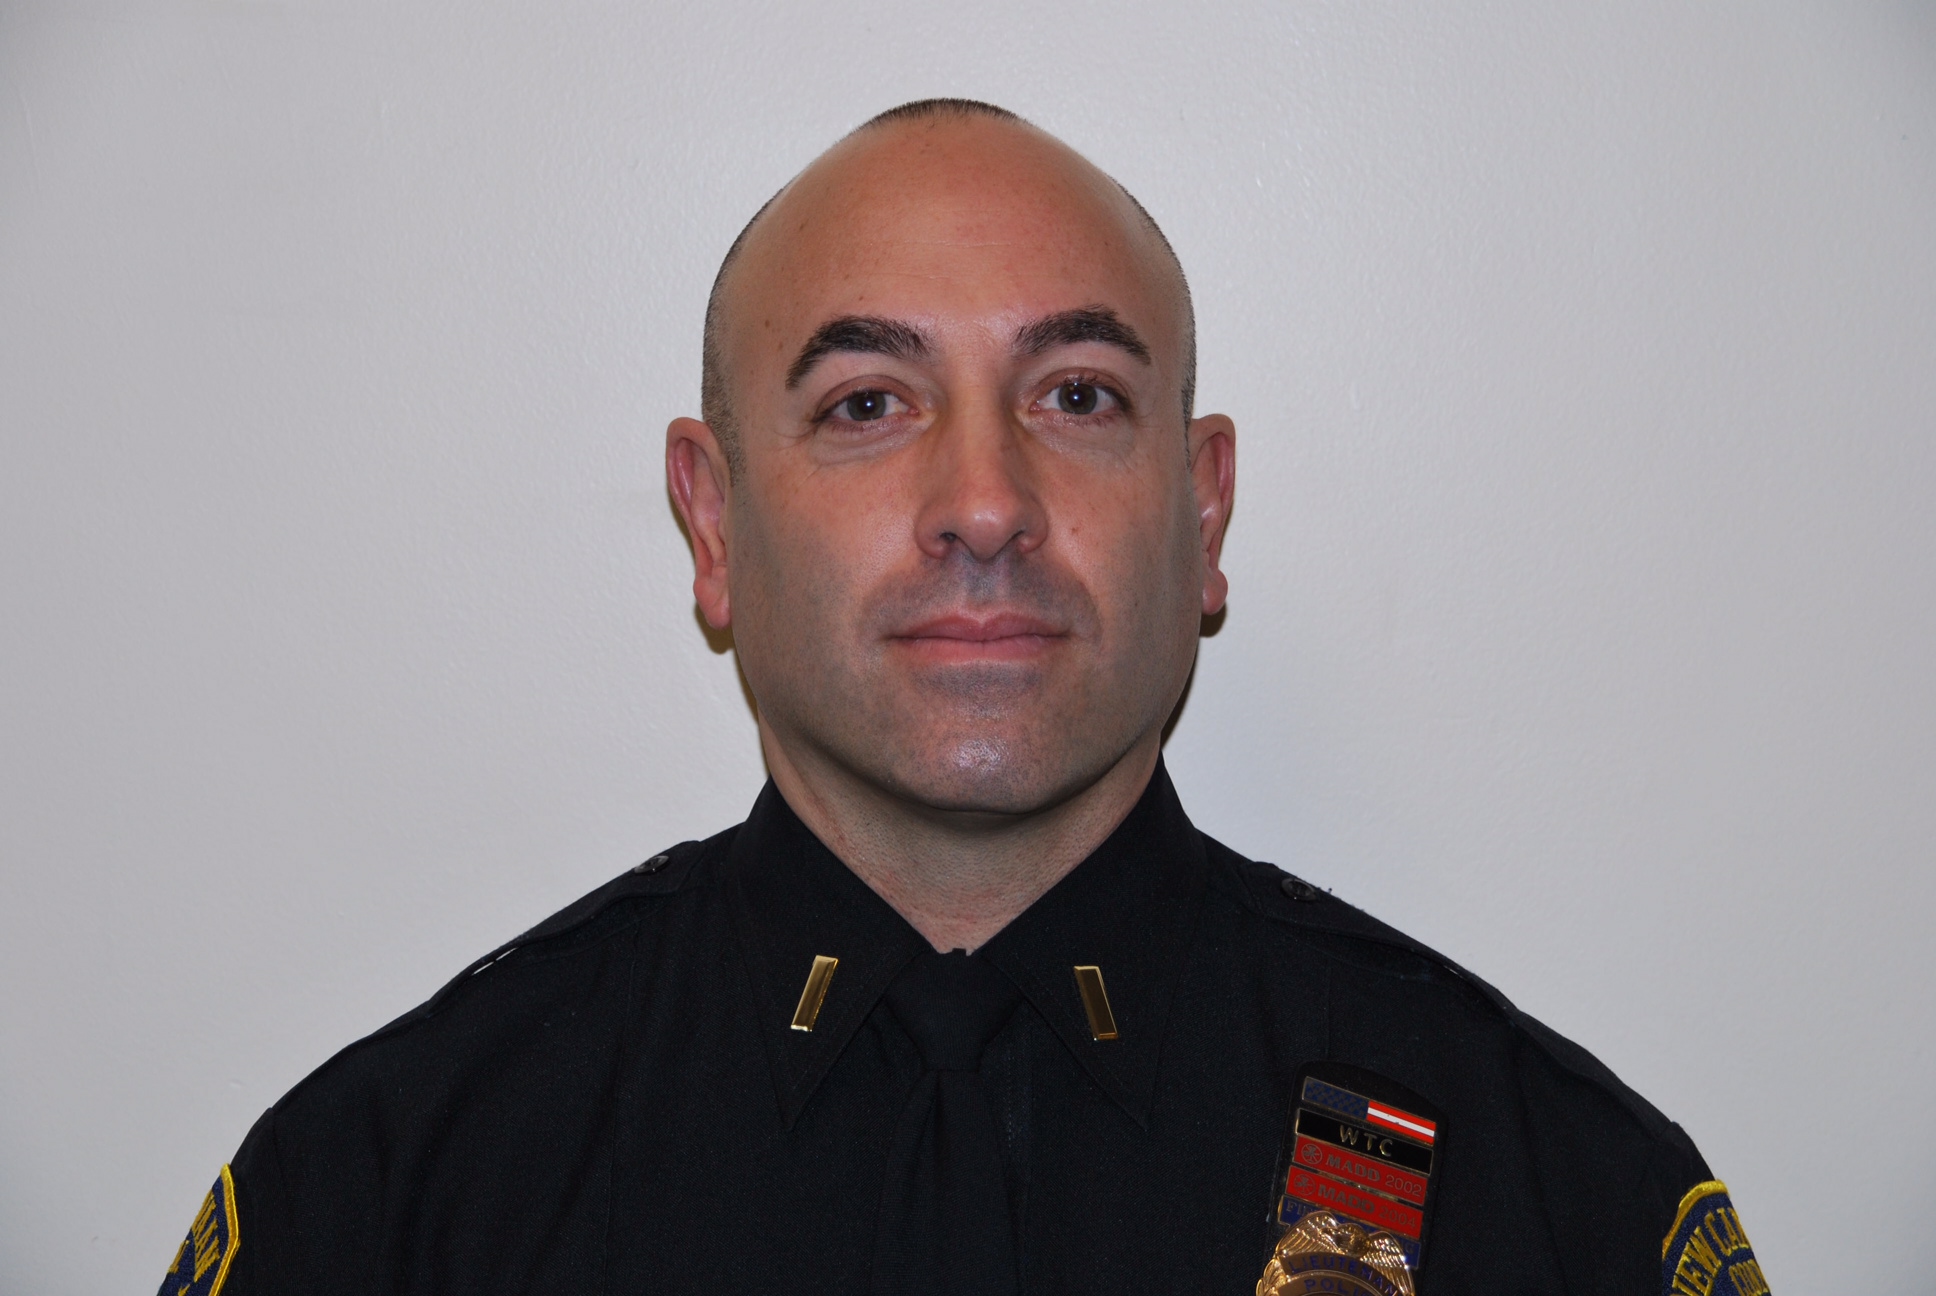 Lt. Jason Ferraro. Photo courtesy of the New Canaan Police Department